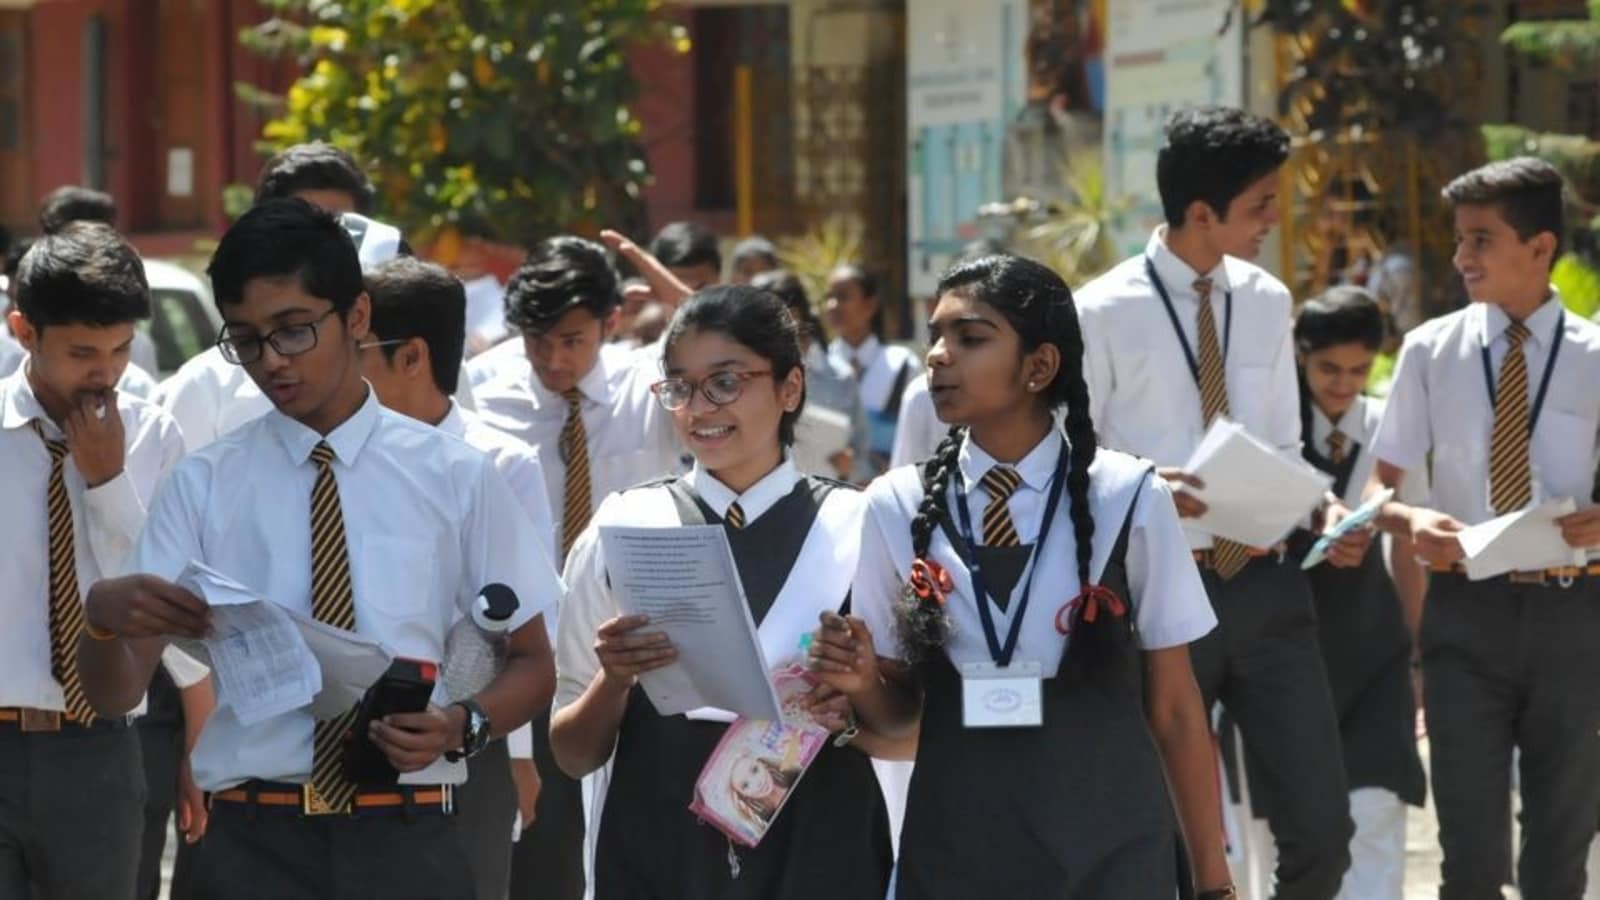 Maharashtra Board SSC 10th results 2022: MSBSHSE Class 10 result releasing today